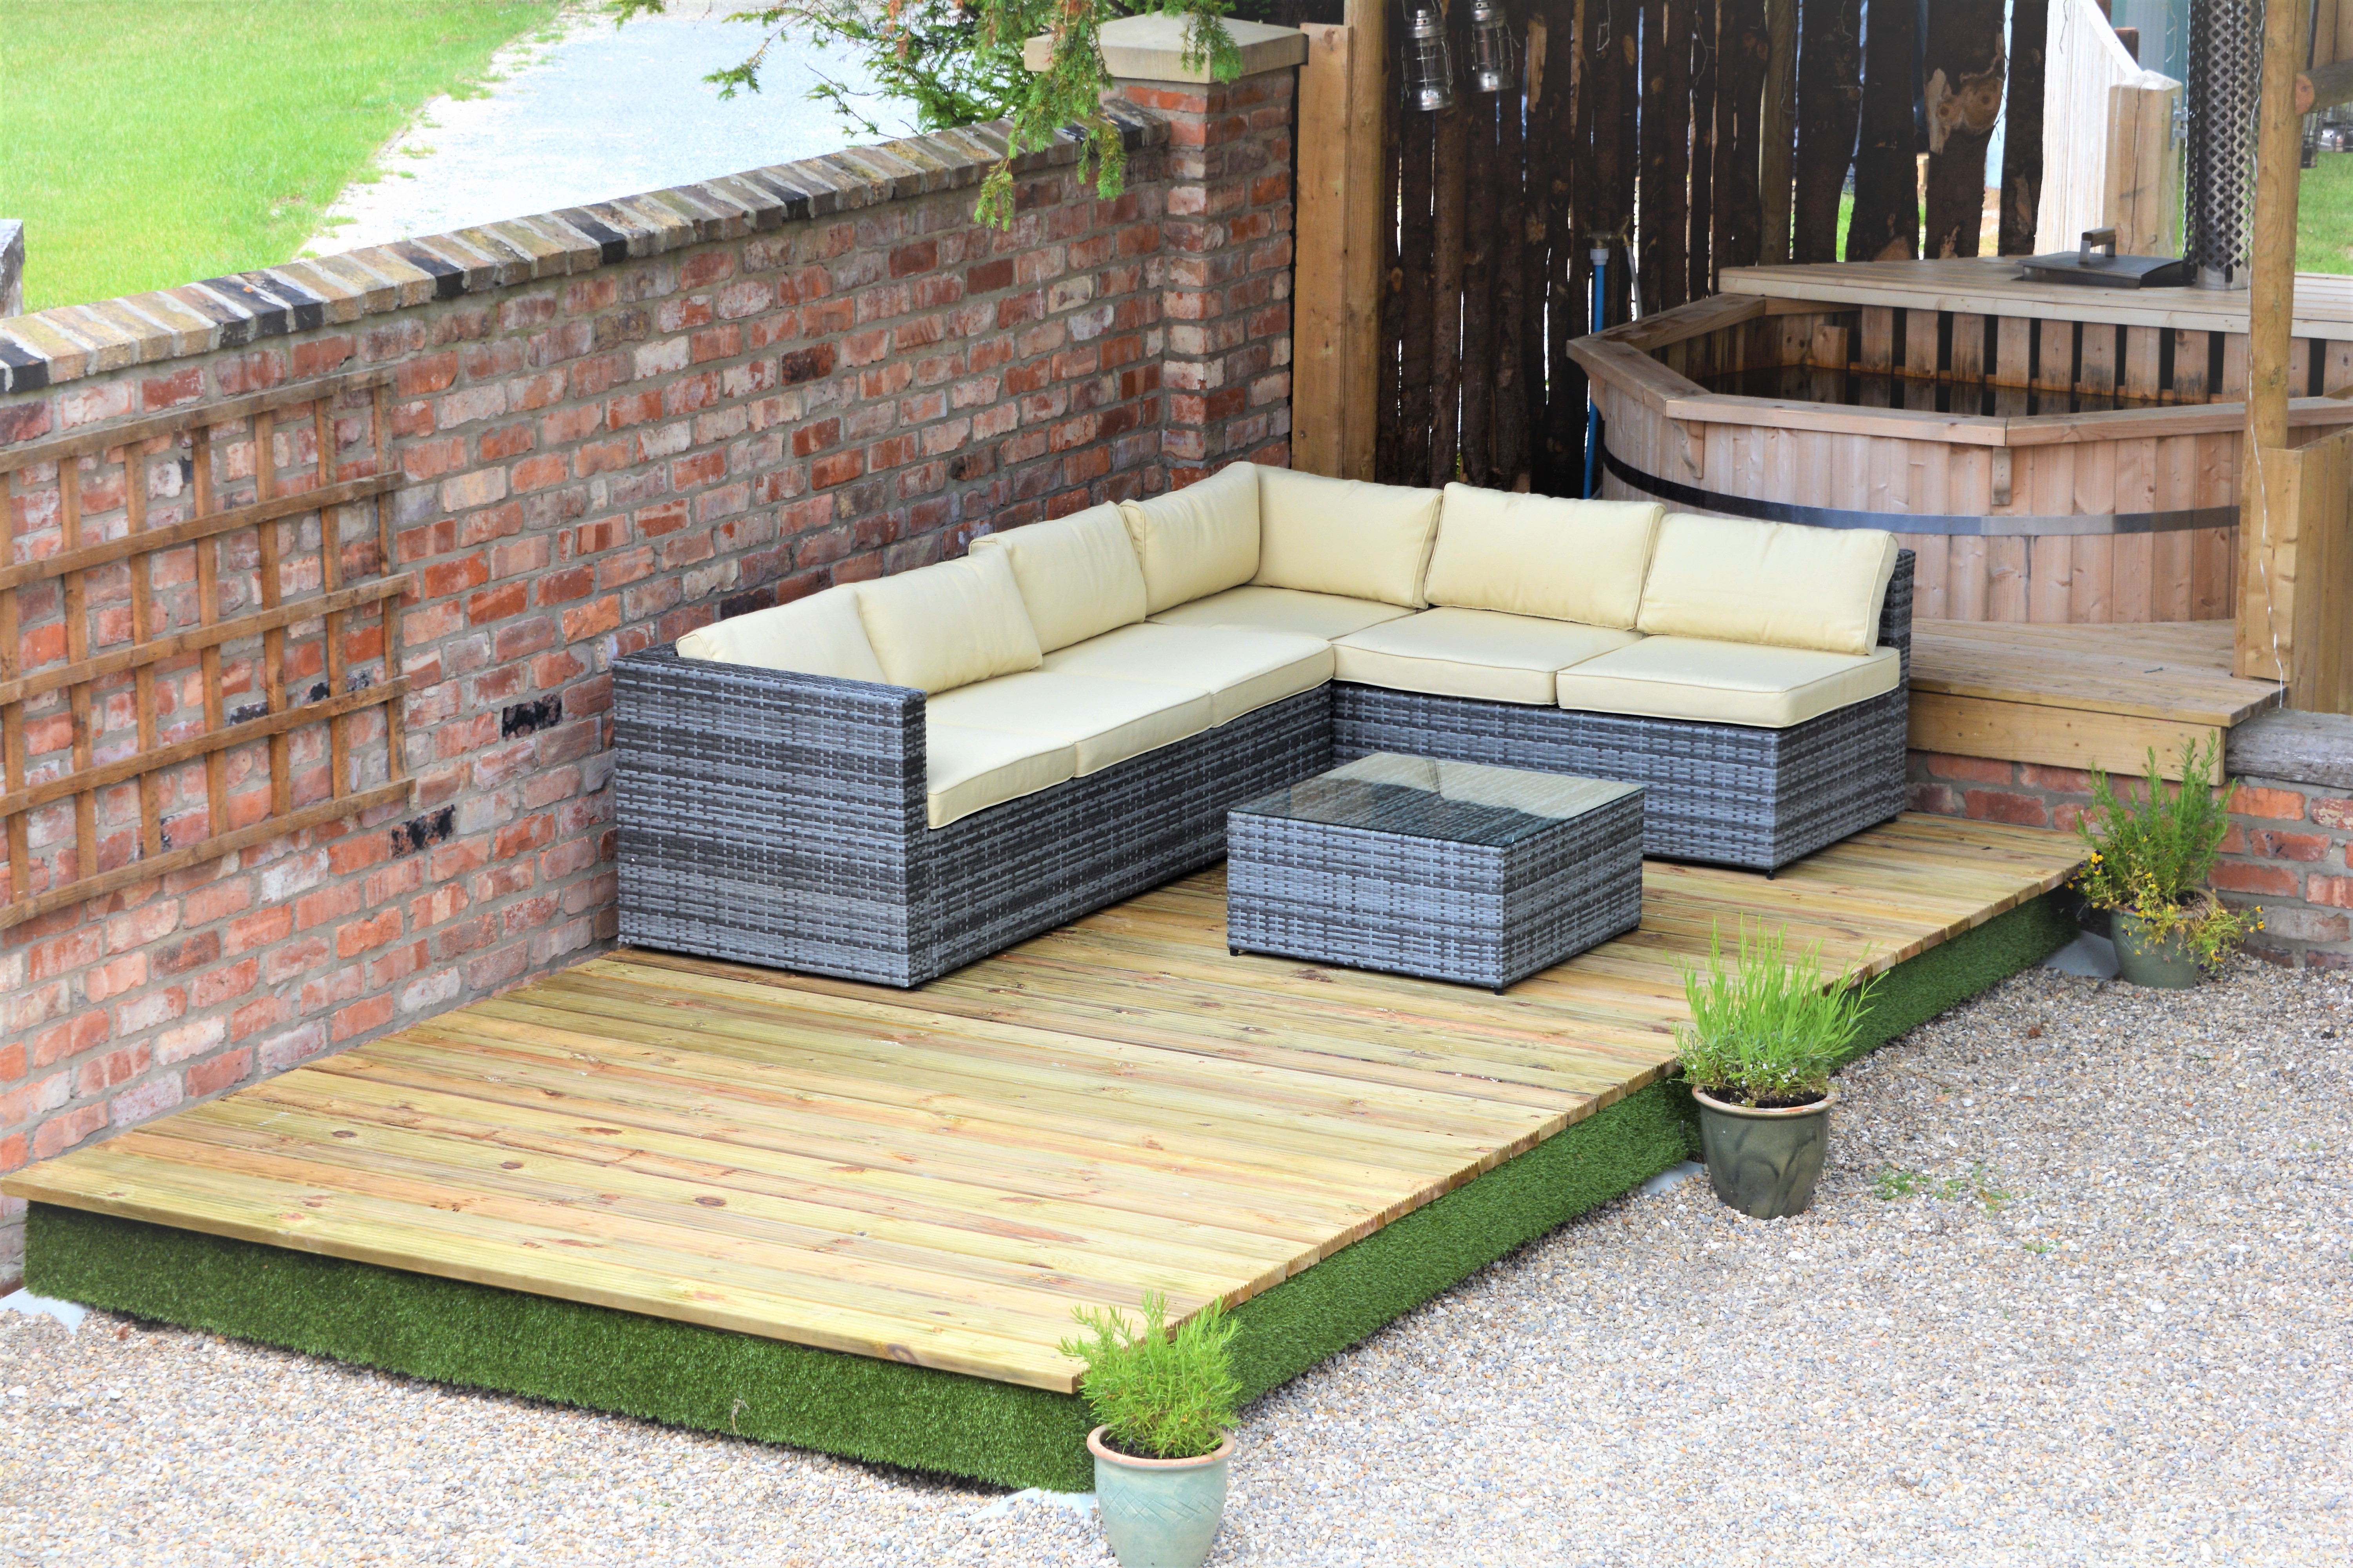 Image of Swift Deck Self-Assembly Garden Decking Kit With Adjustable Foundations - 2.4 x 7.0m